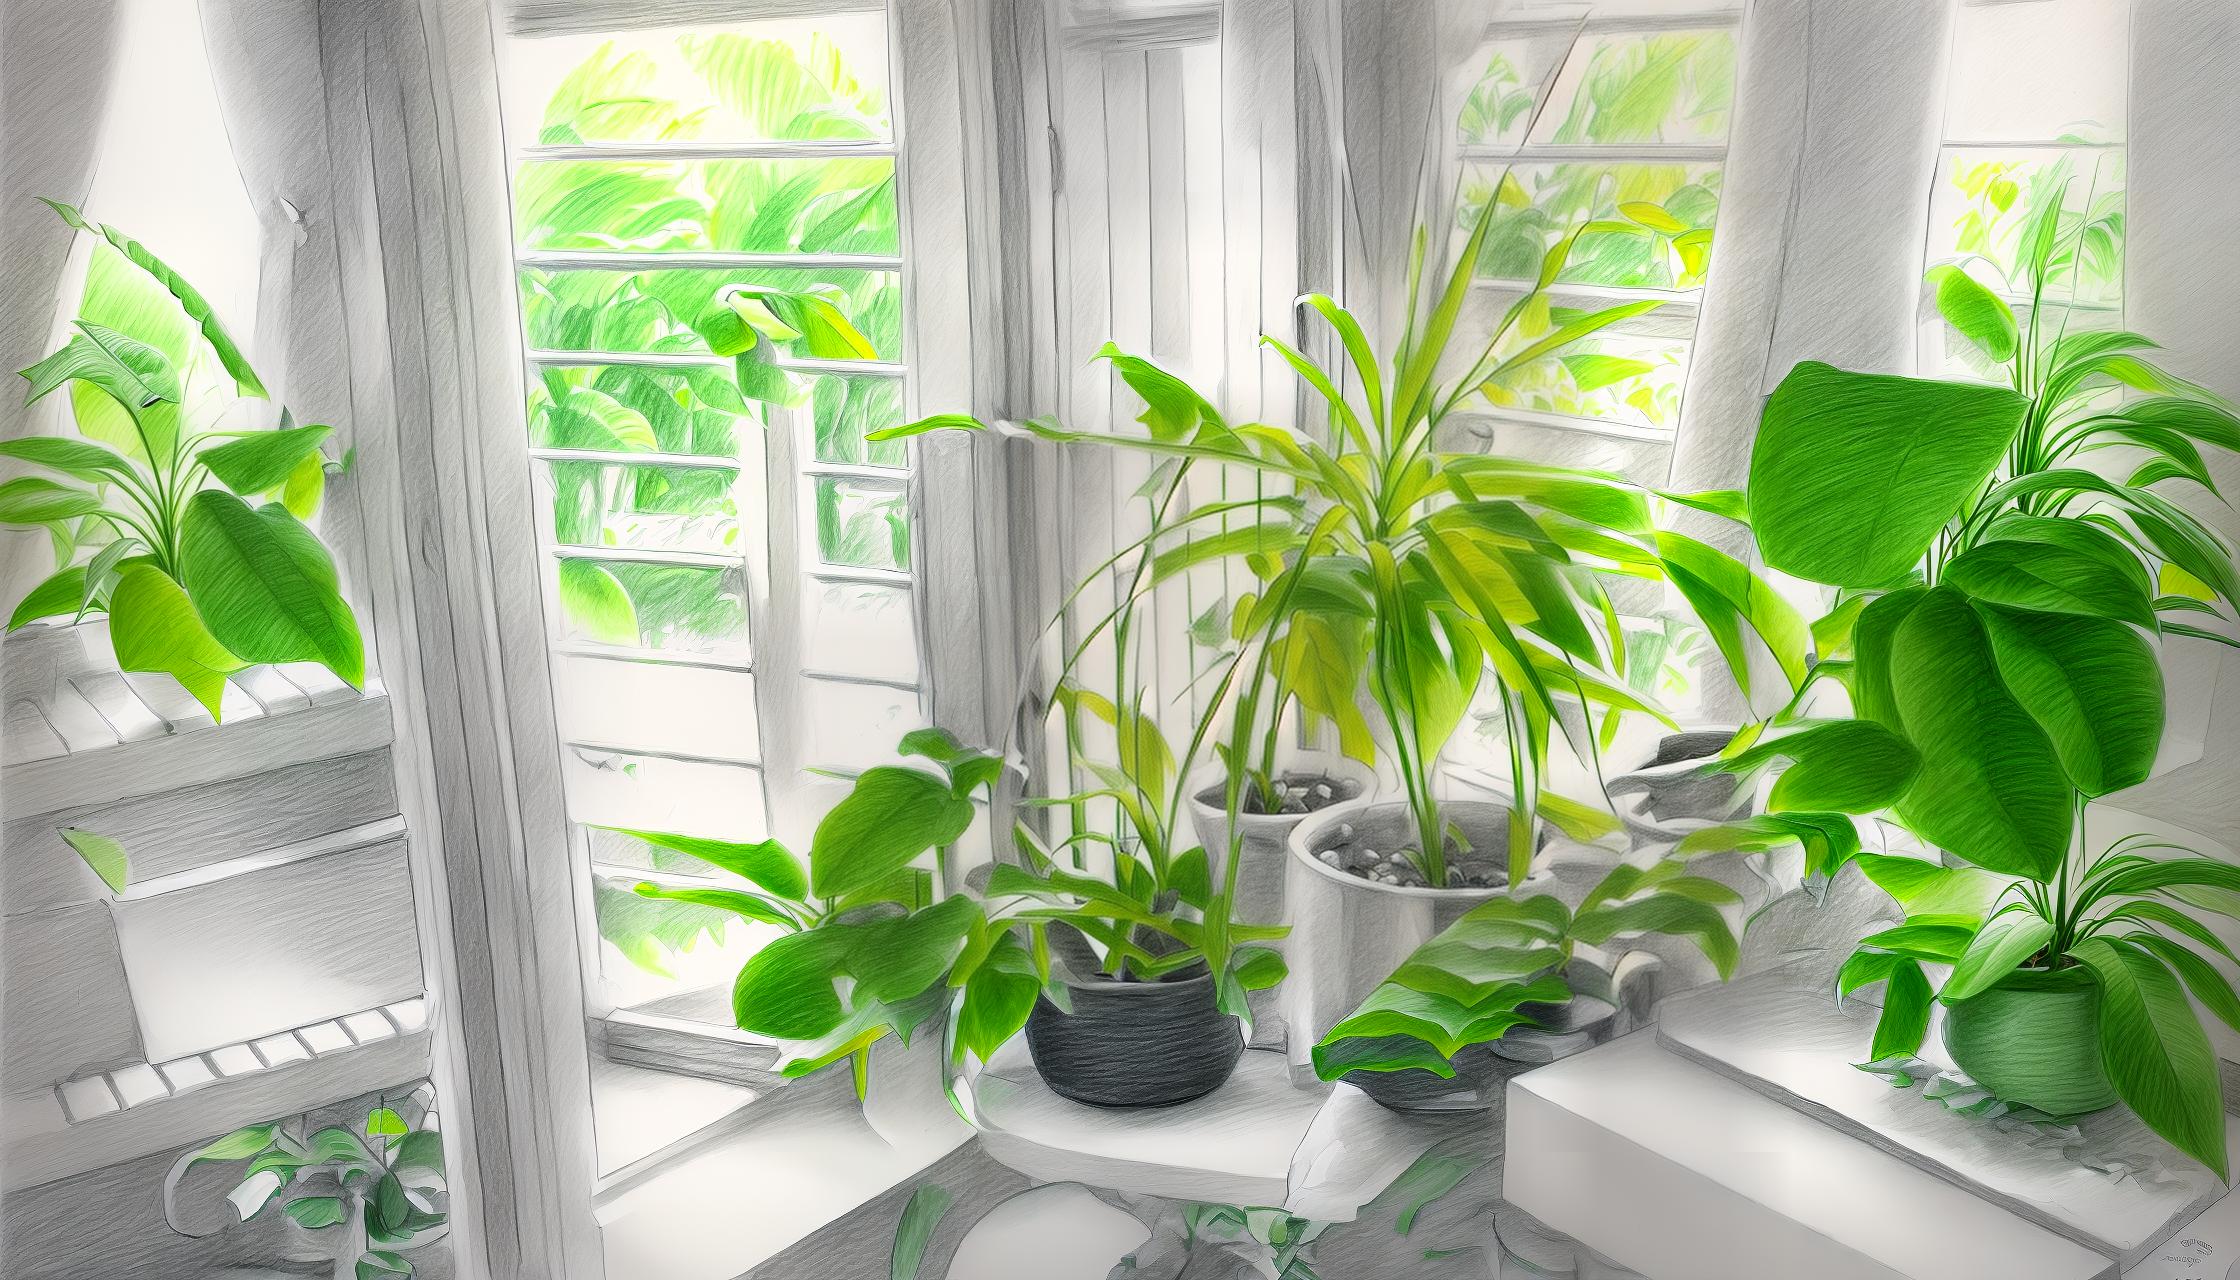  a hyper realistic pencil ,hand drawn professional pencil sketch of a window with a few potted plants in front of it , bw, masterpiece, sketch, best quality, sketch, grain